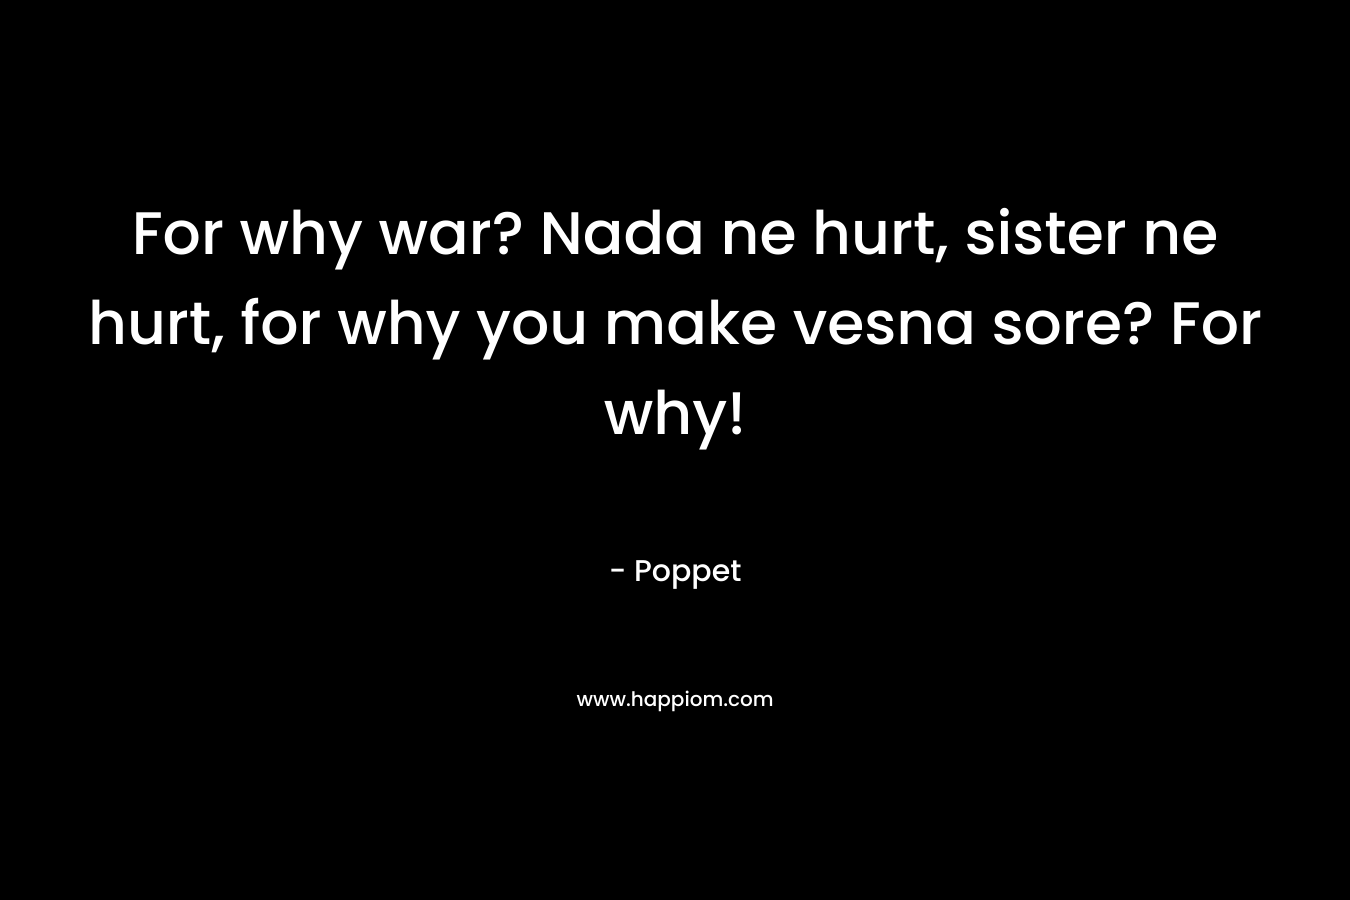 For why war? Nada ne hurt, sister ne hurt, for why you make vesna sore? For why!